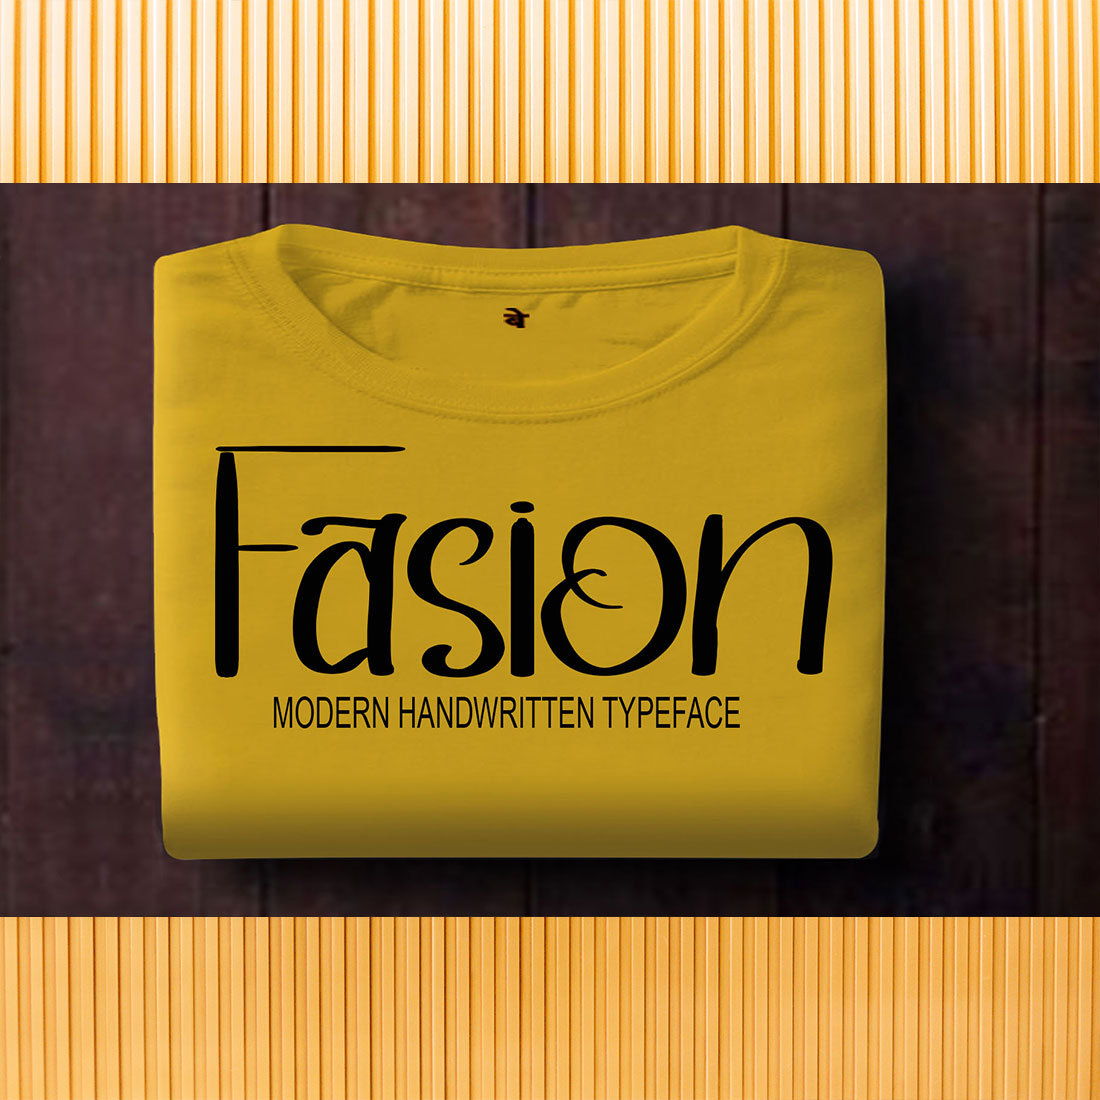 A picture of a T-shirt with text showing the wonderful Gosong font.